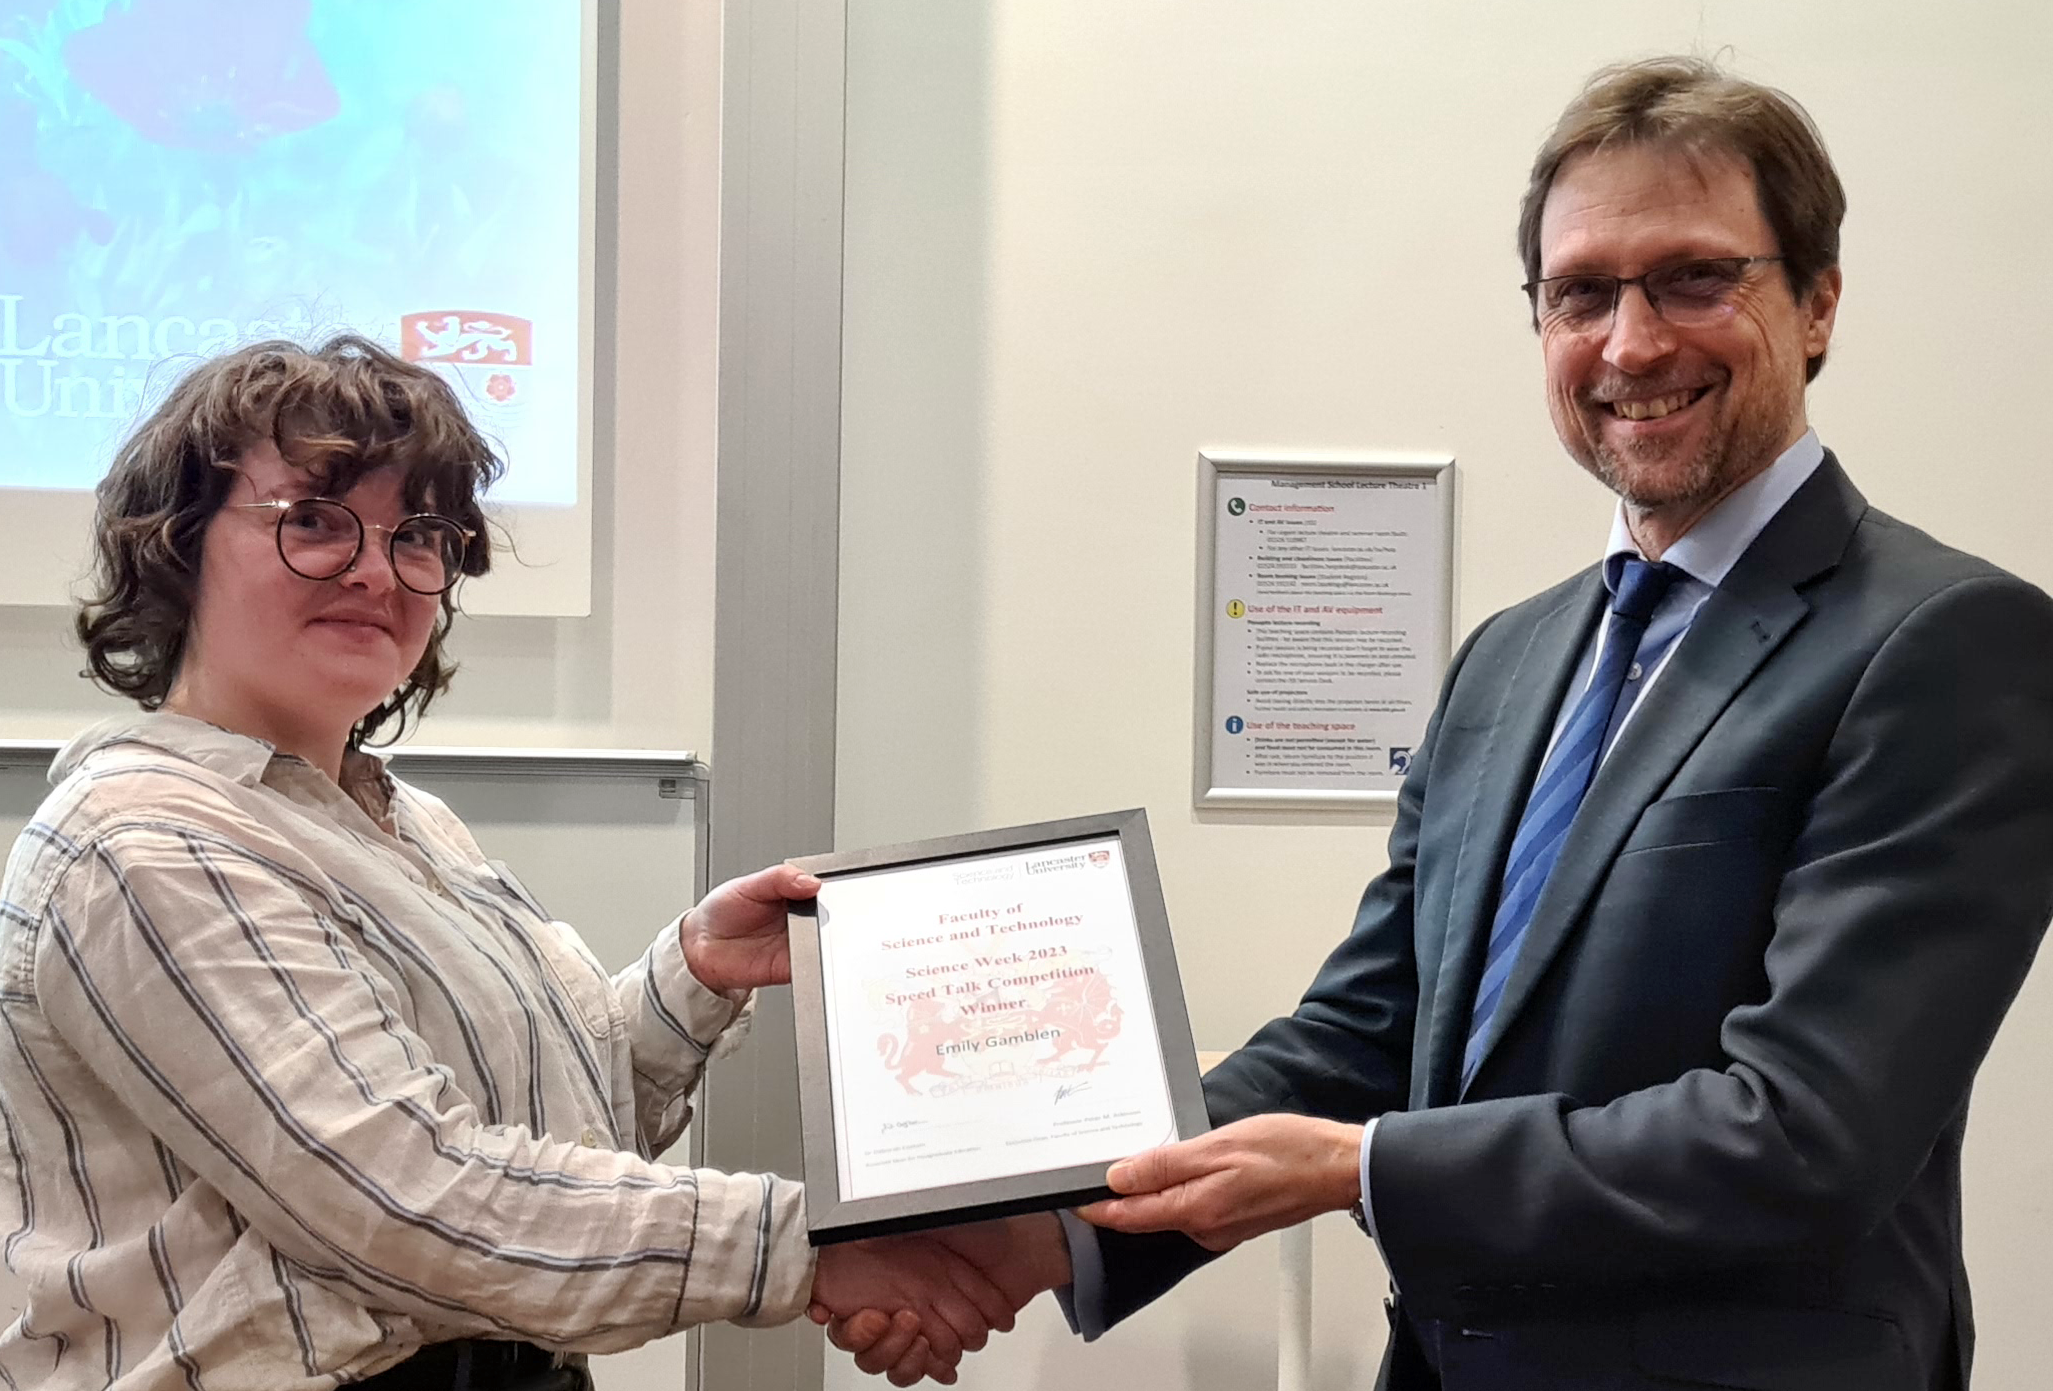 The Dean of the Faculty of Science and Technology presenting Emily with prize certificate